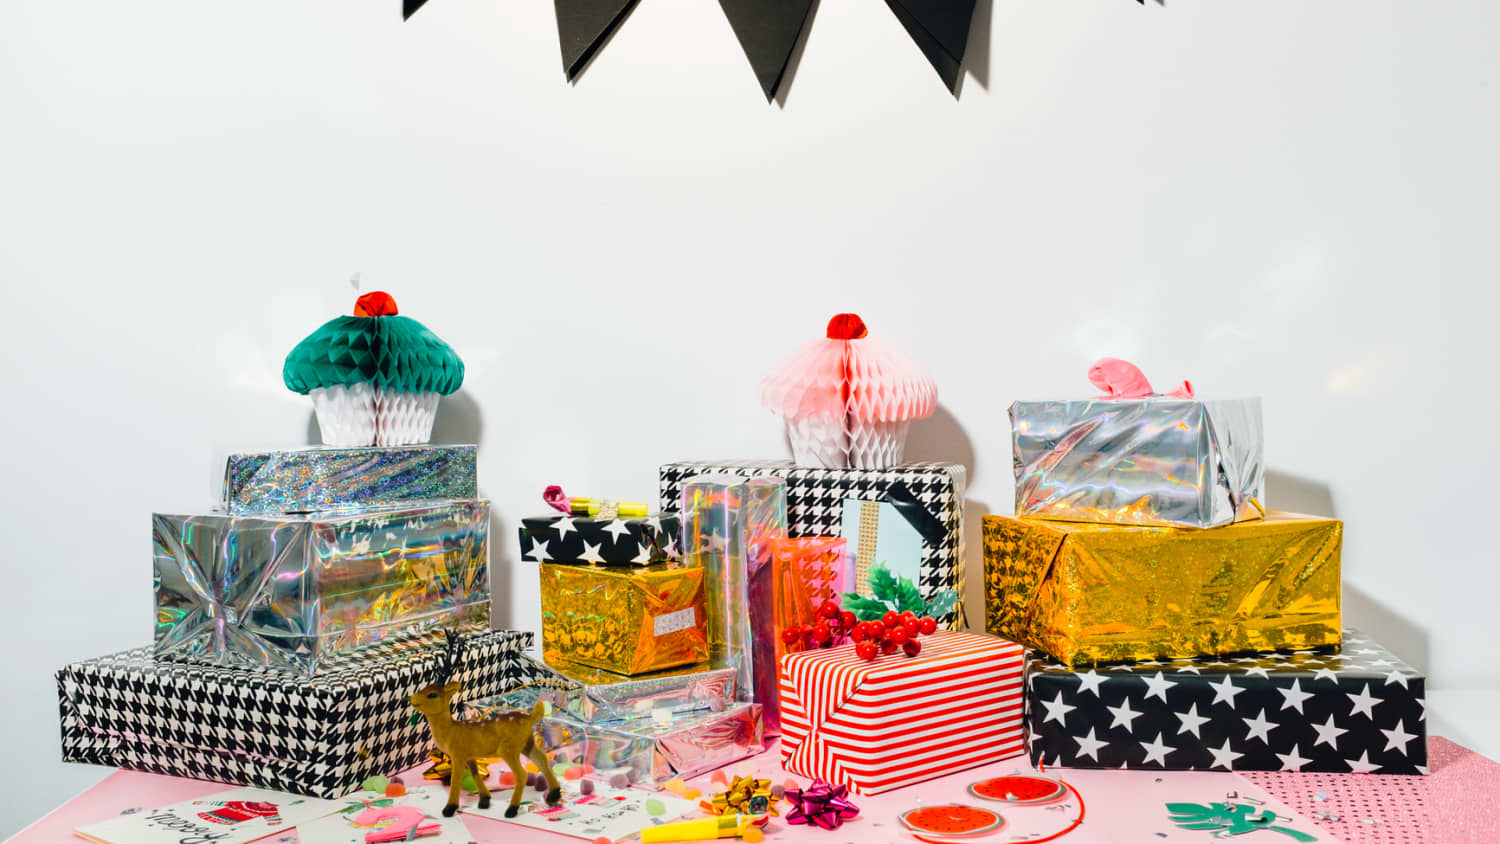 30 Gifts under $30 for White Elephant Parties, by The Chic Geek, The Chic  Geek